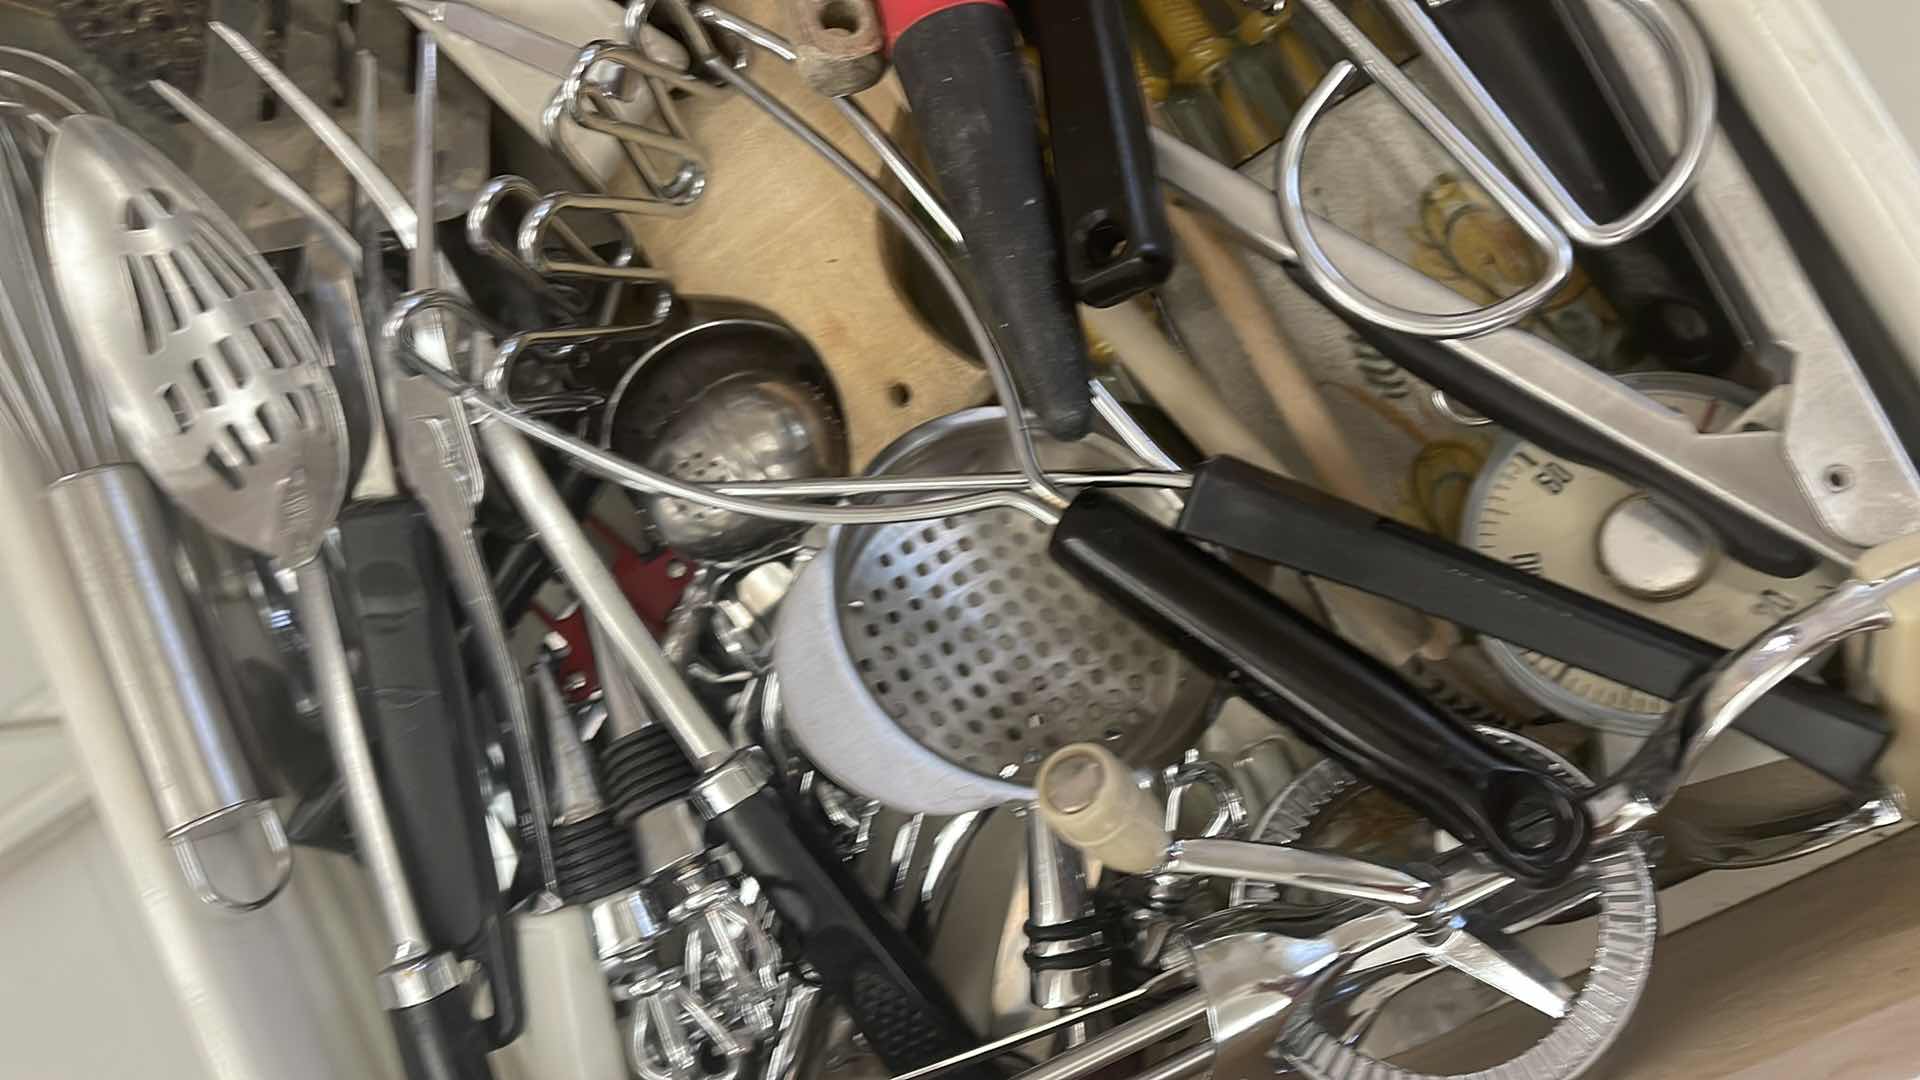 Photo 4 of CONTENTS OF KITCHEN DRAWER - COOKING UTENSILS